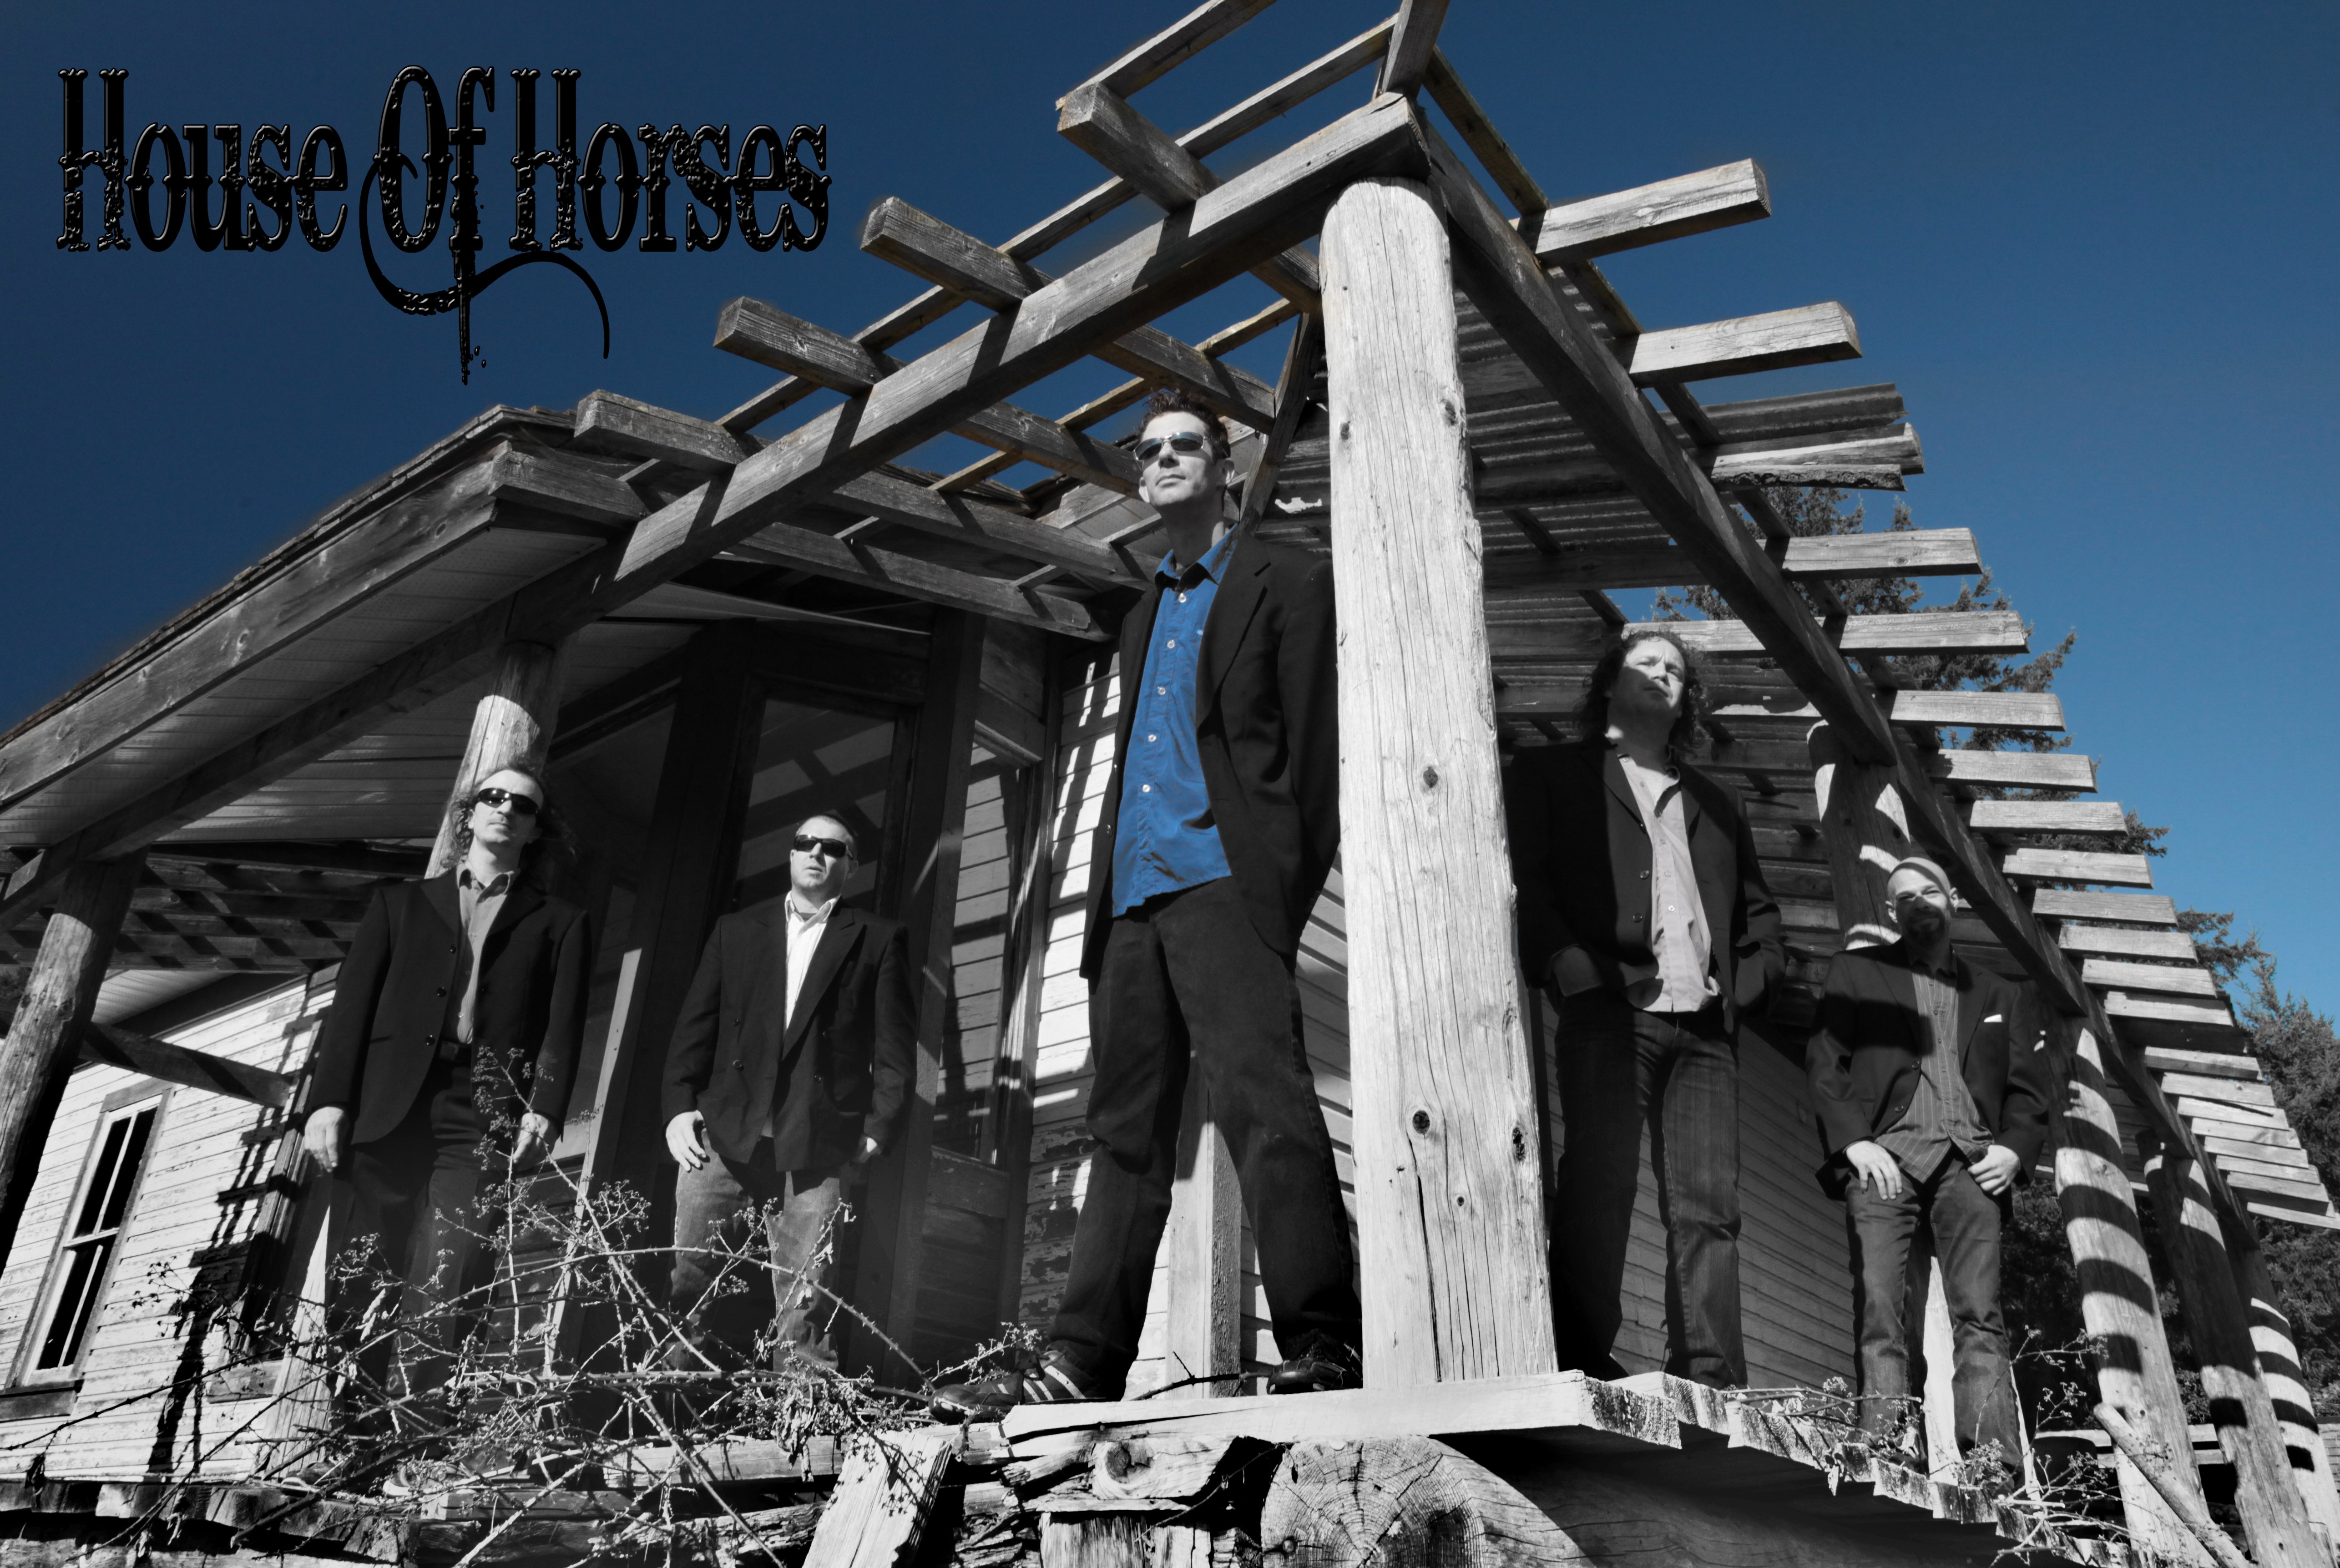 House of Horses 12 song album 12 music videos. It's practically a movie.